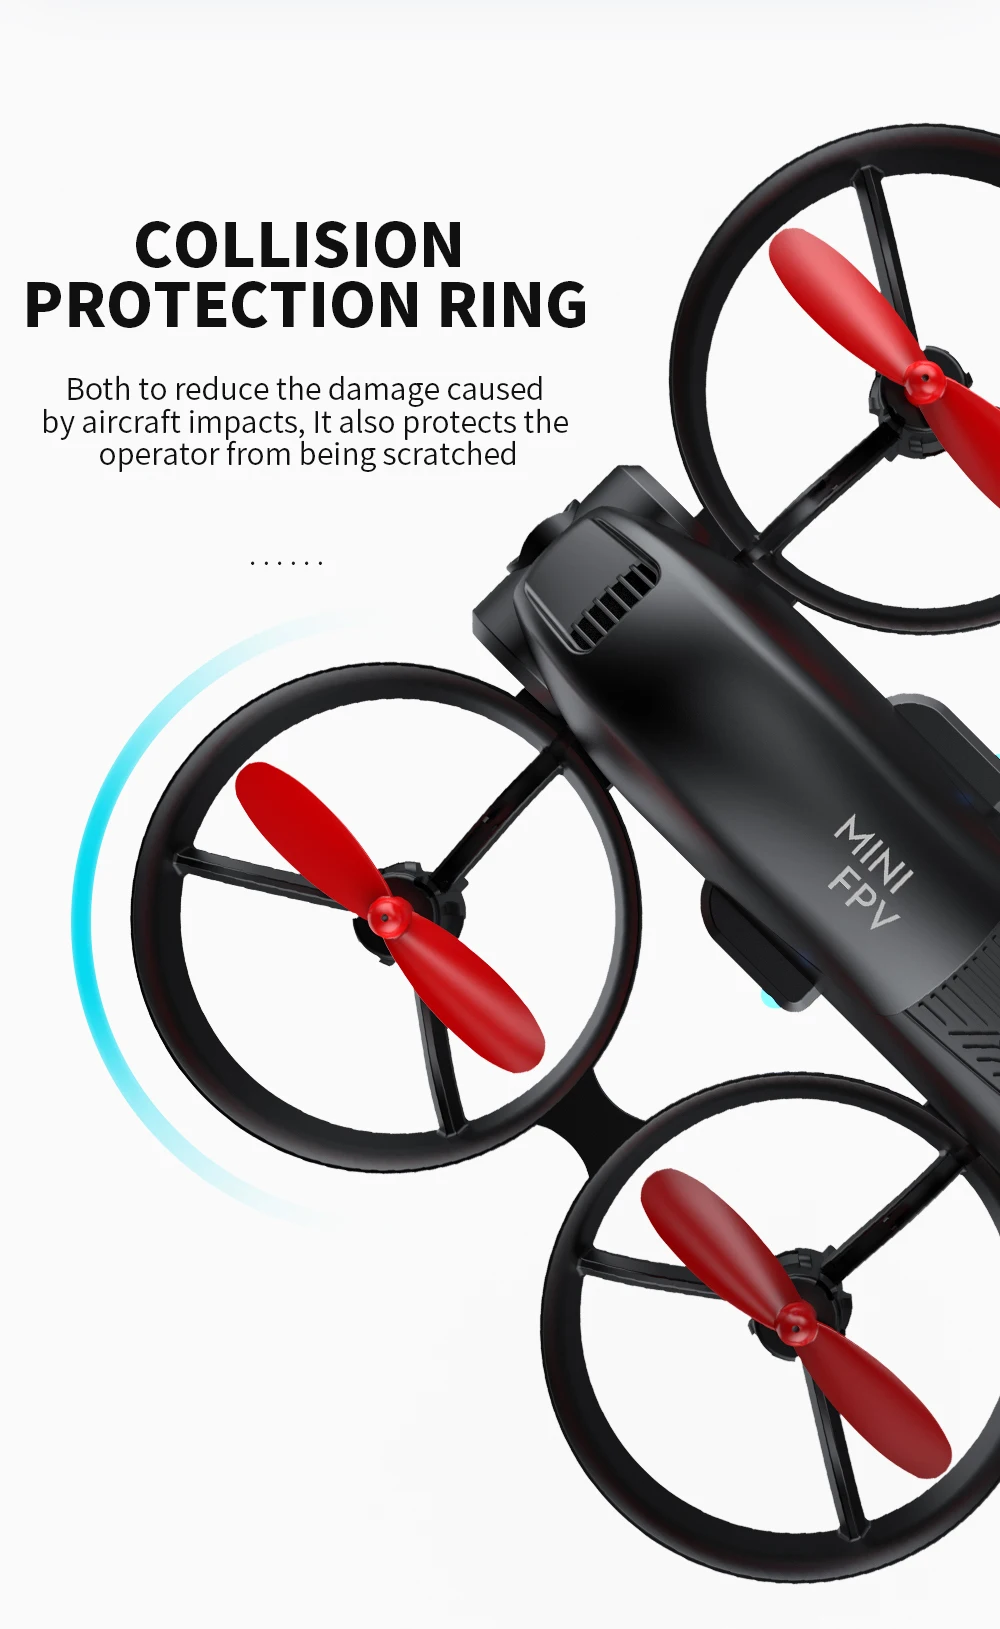 rc helicopter with camera Best KF615 Mini Drone 4K With HD Dual Camera Quadcopter 2.4G Wifi FPV Optical Flow Positioning Height Hold RC Gift For Kids Toy large rc helicopters